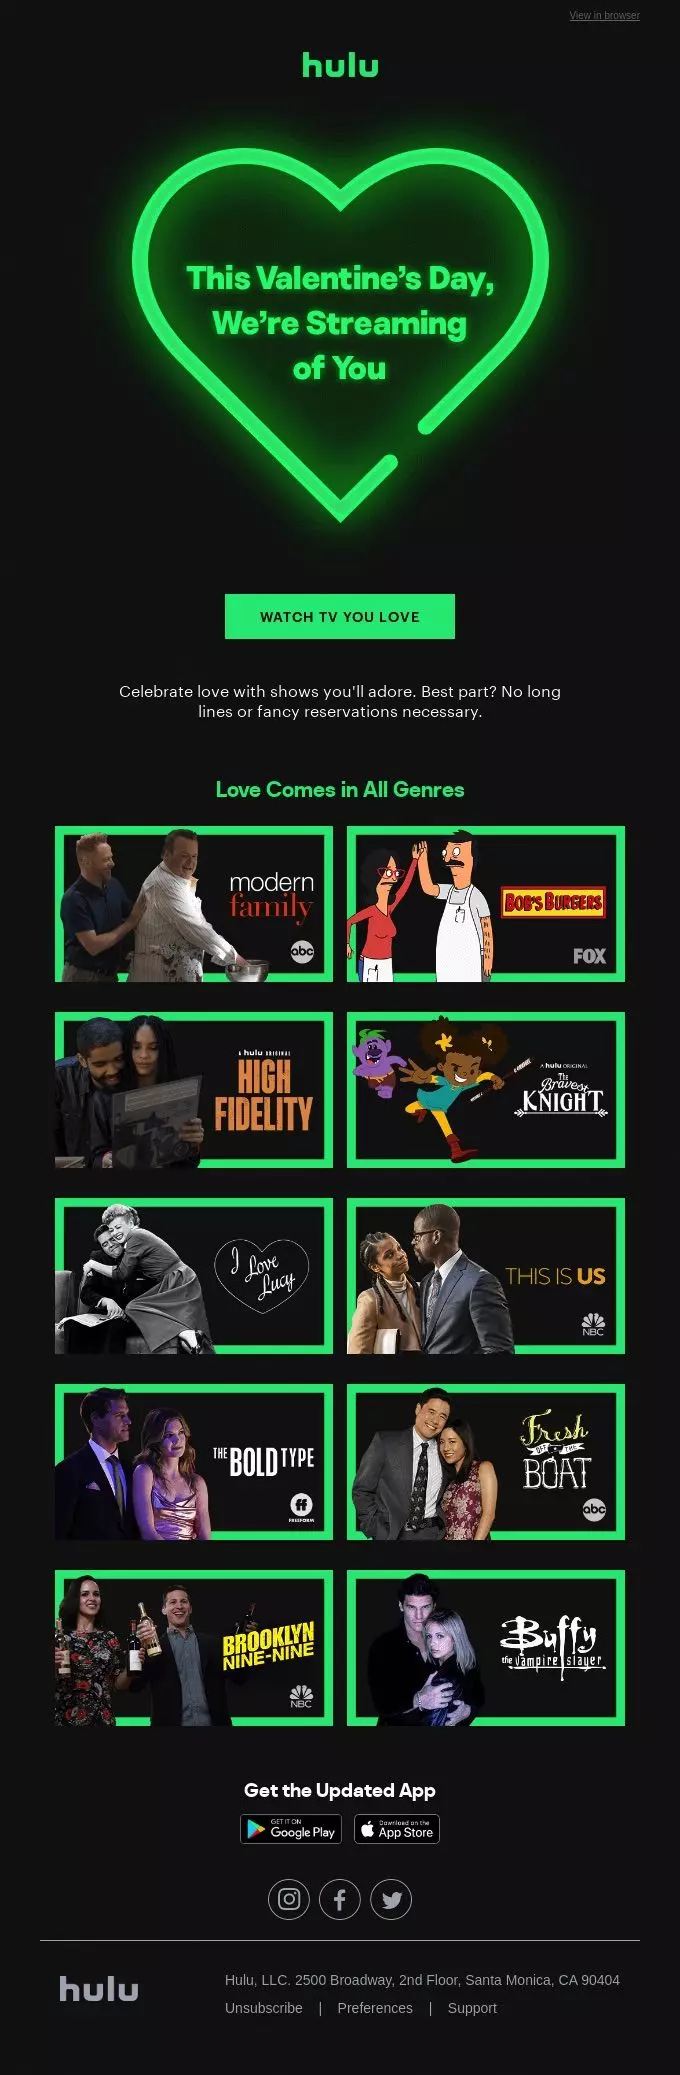 Hulu Email promotion